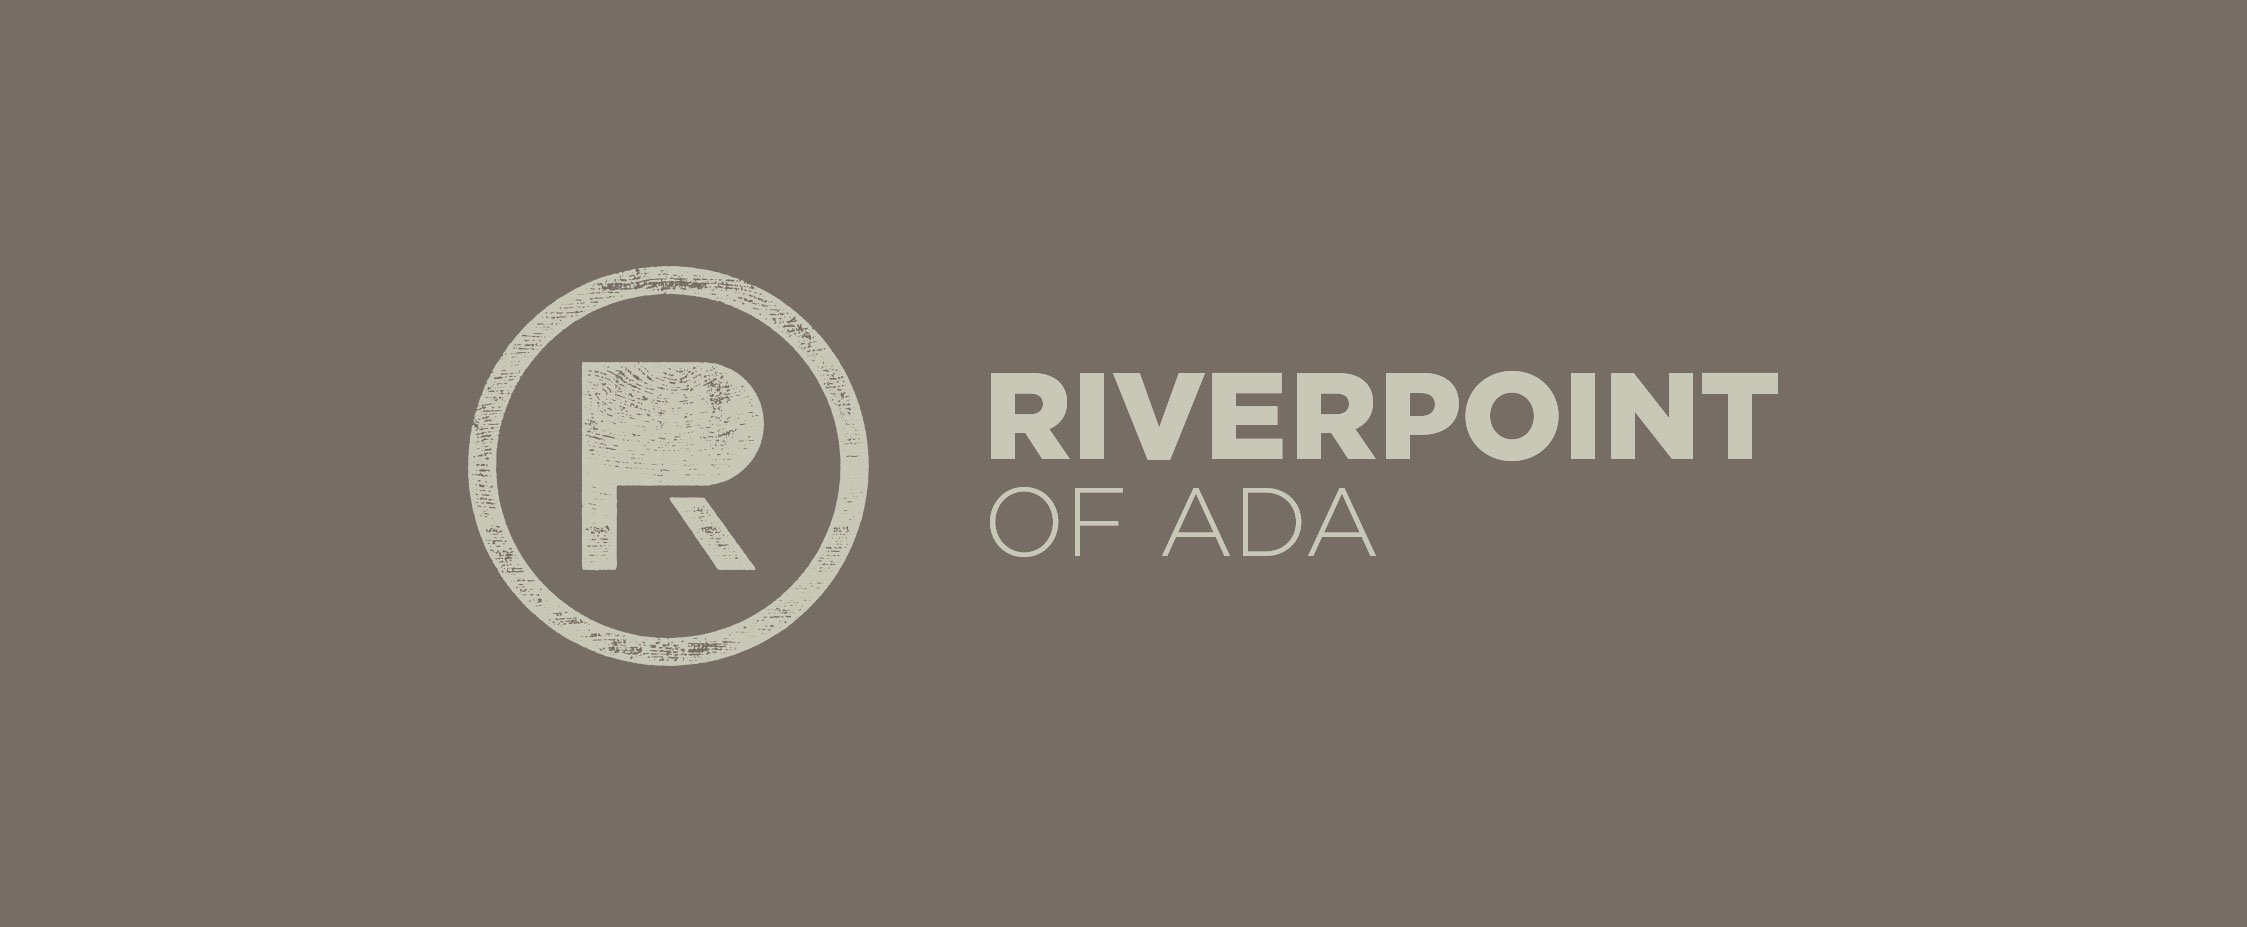 Riverpoint of Ada